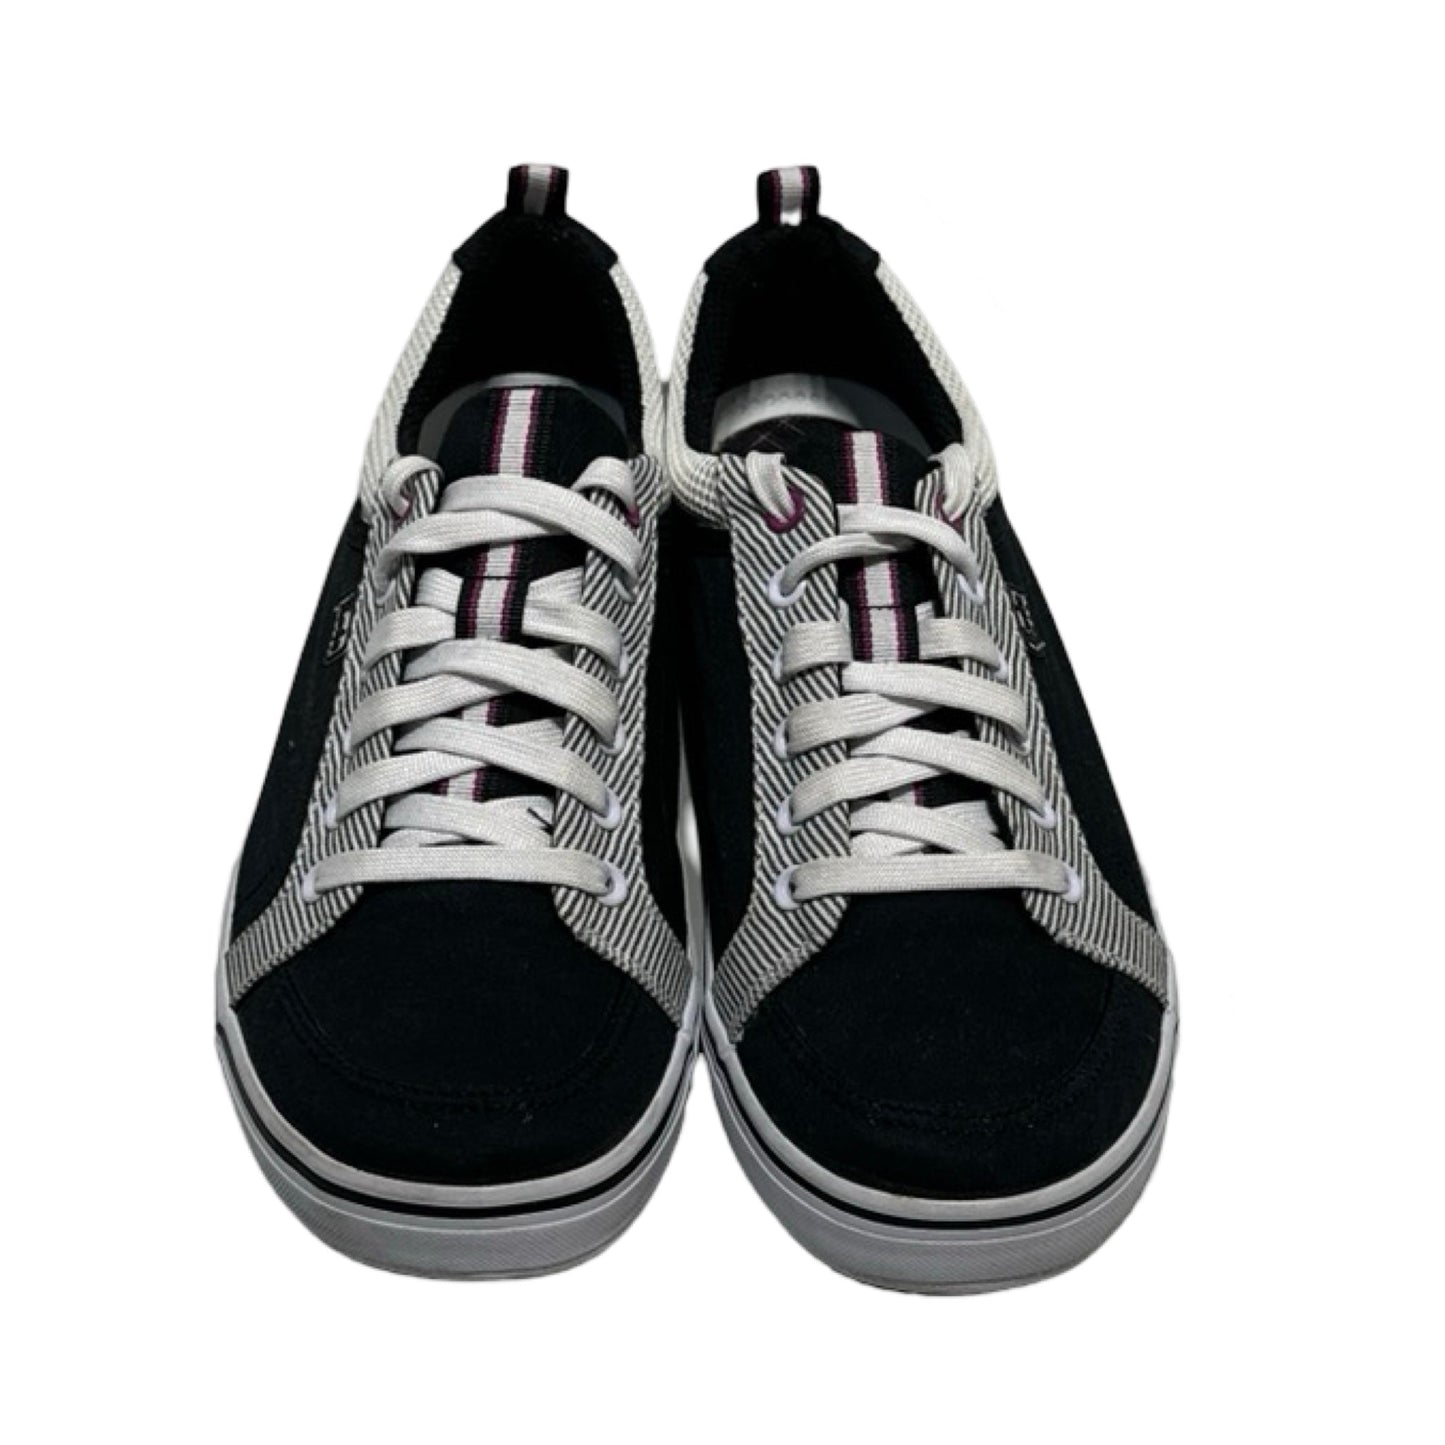 Black & White Shoes Sneakers Keds, Size 9